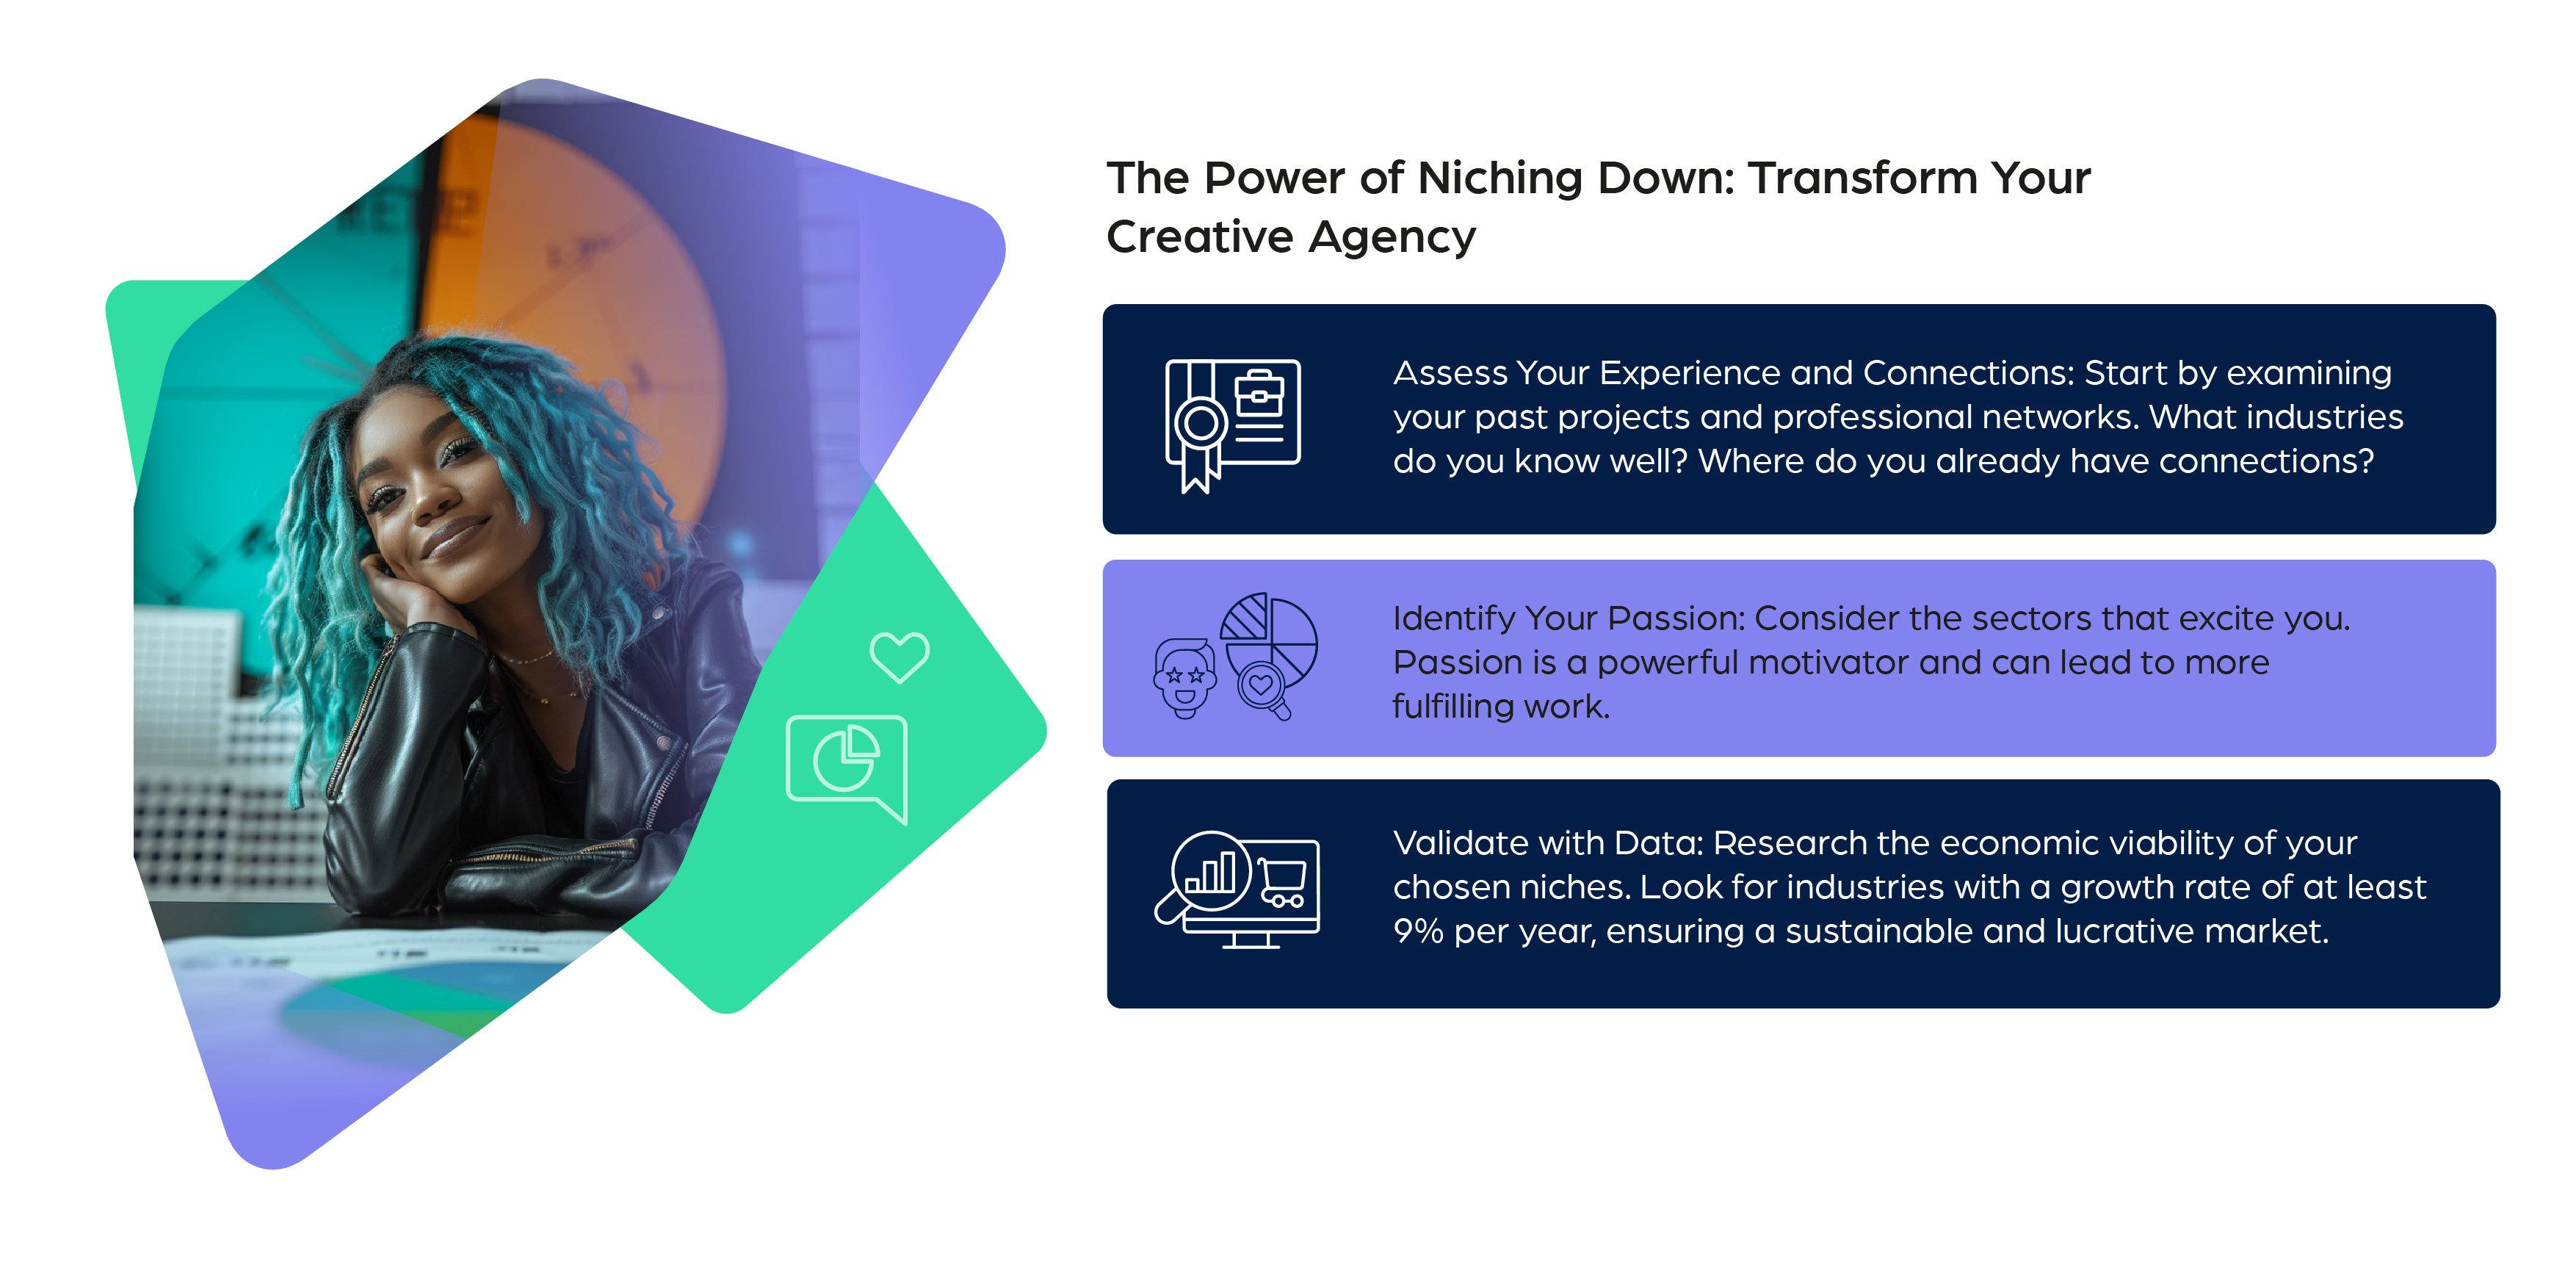 The Power of Niching Down: Transform Your Creative Agency